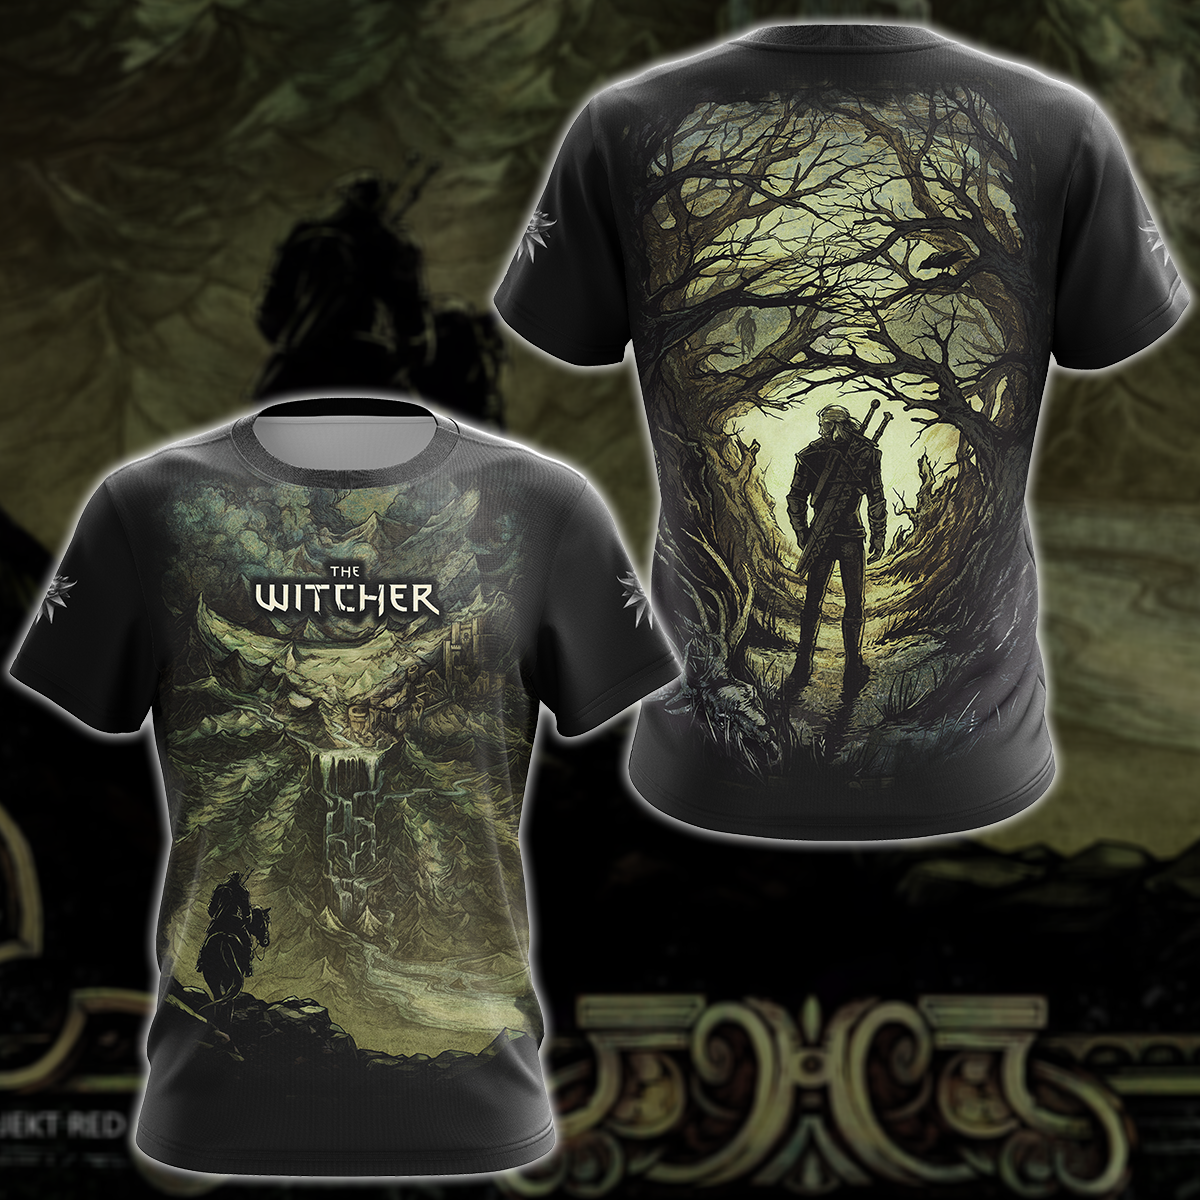 The Witcher Video Game 3D All Over Printed T-shirt Tank Top Zip Hoodie Pullover Hoodie Hawaiian Shirt Beach Shorts Jogger T-shirt S 